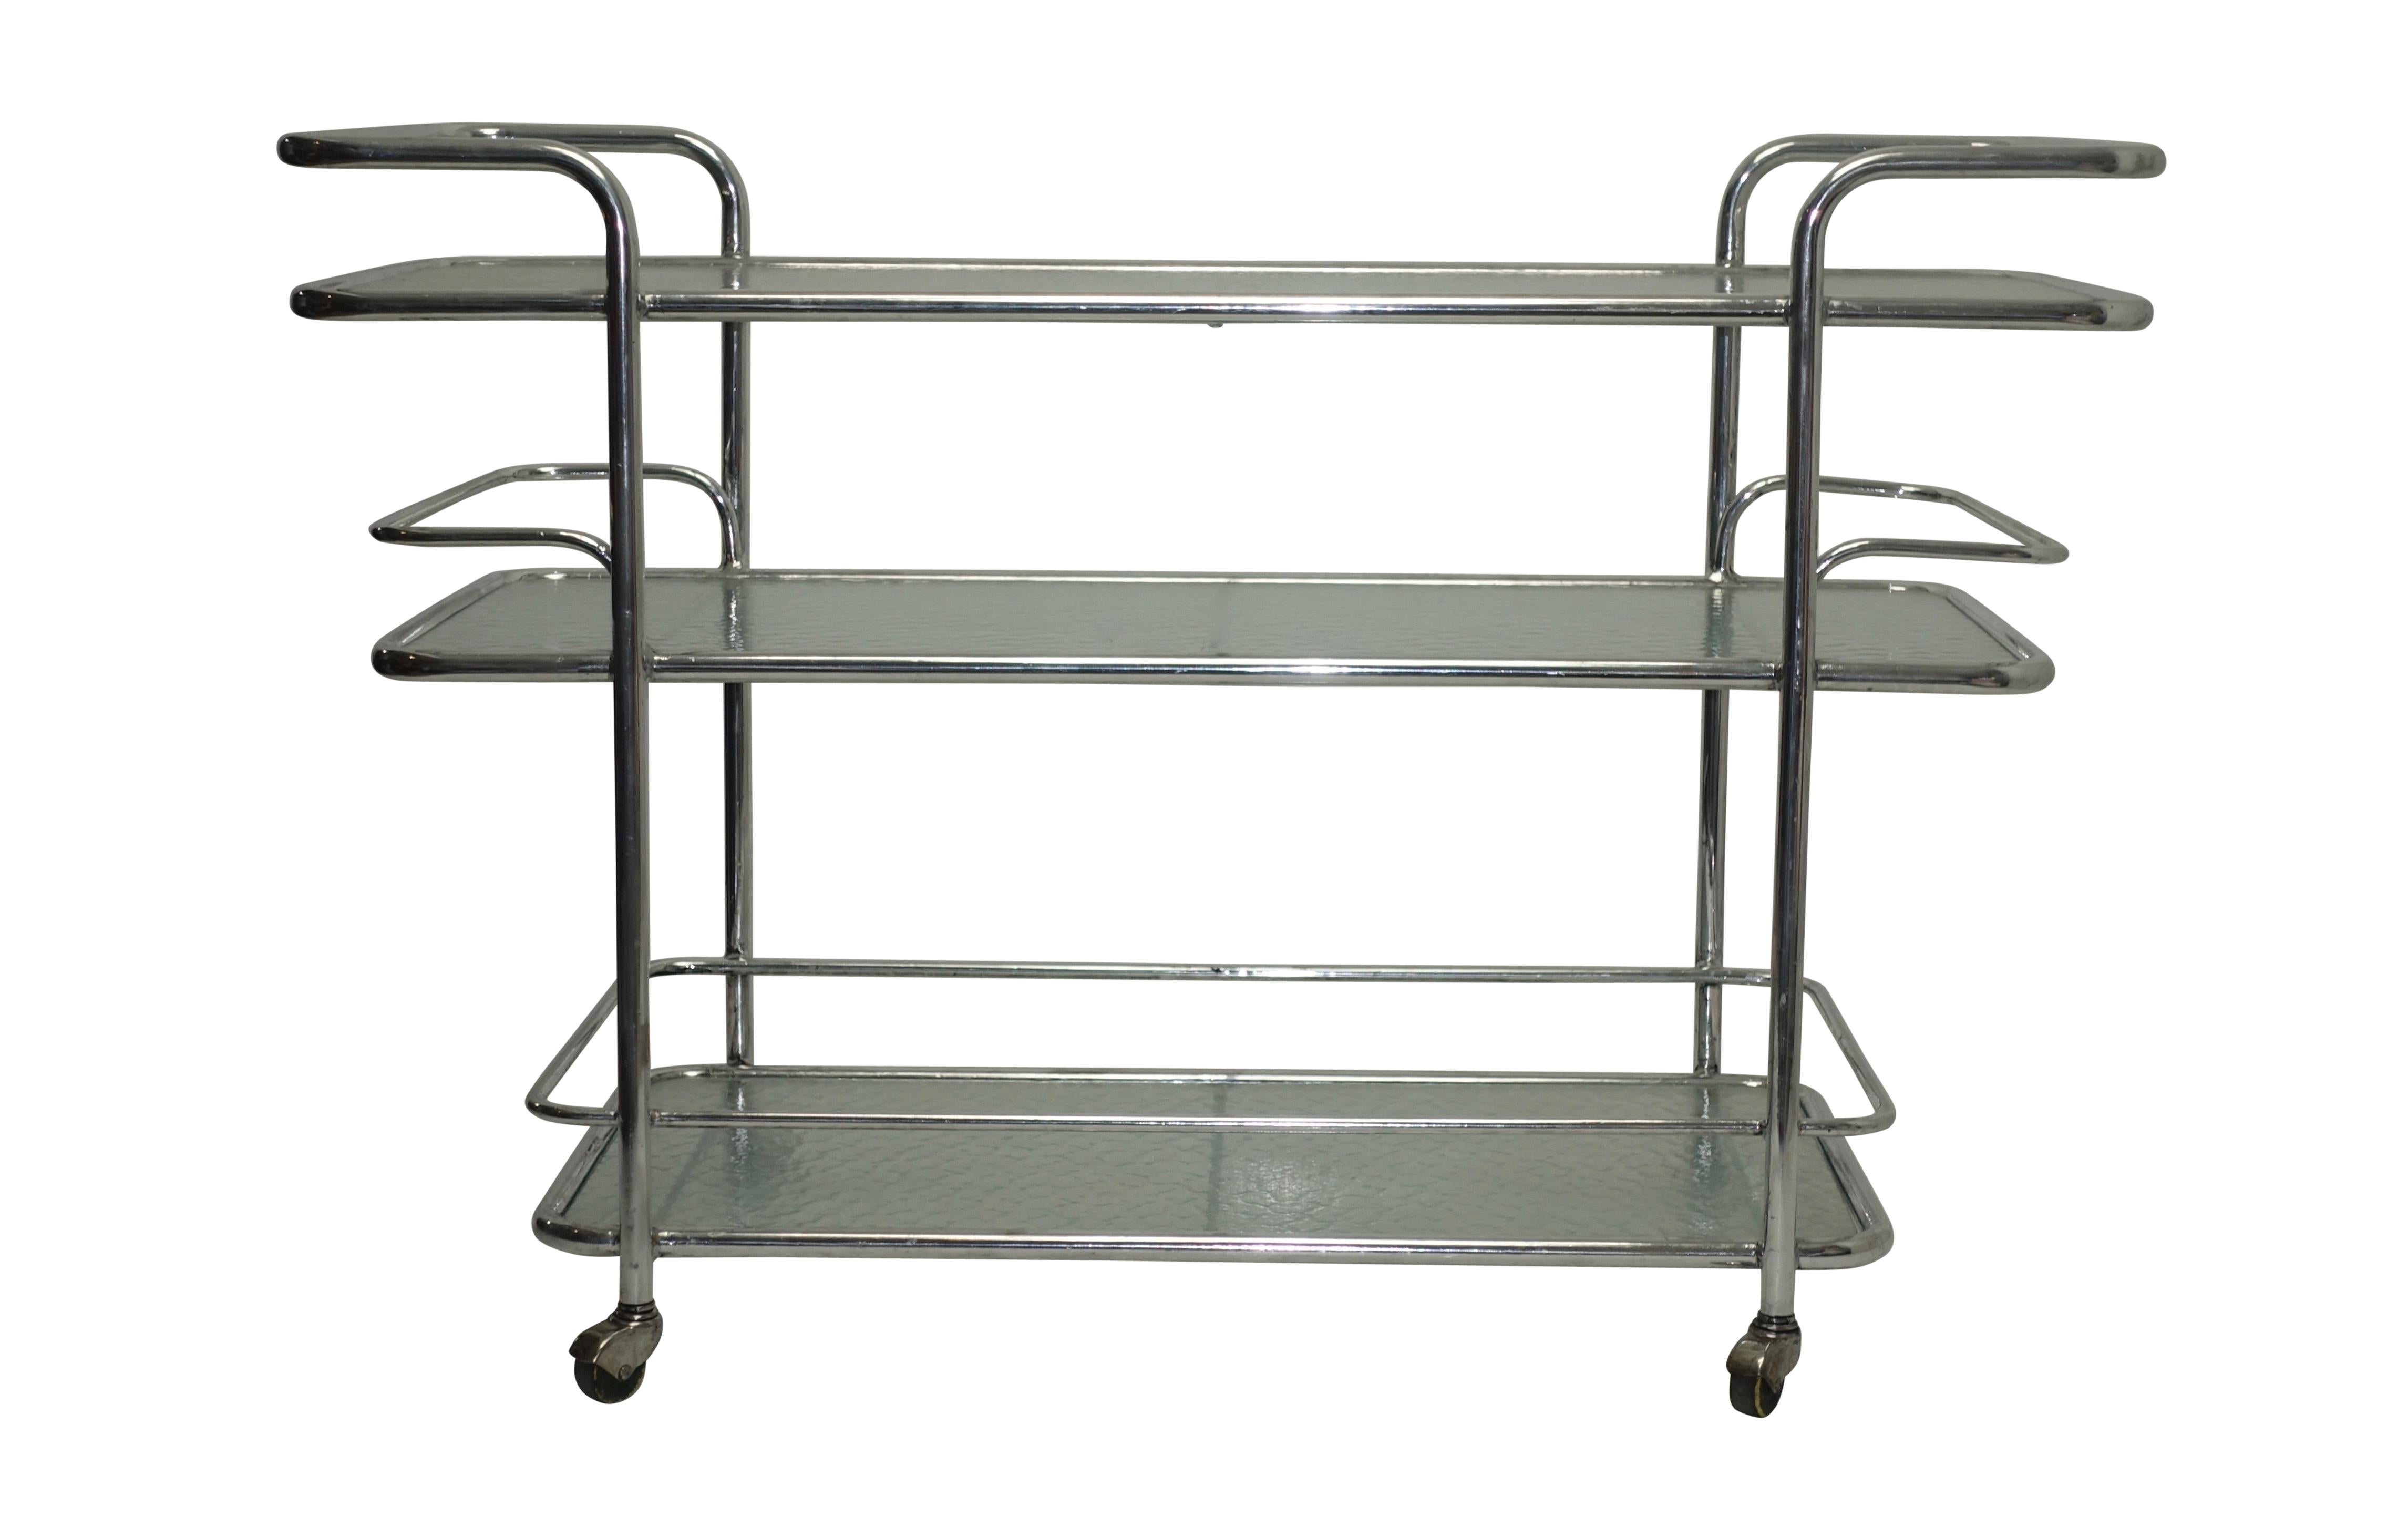 A three-tier polished aluminum serving cart or drinks cart with textured glass shelves on rolling wheels. American, circa 1950.